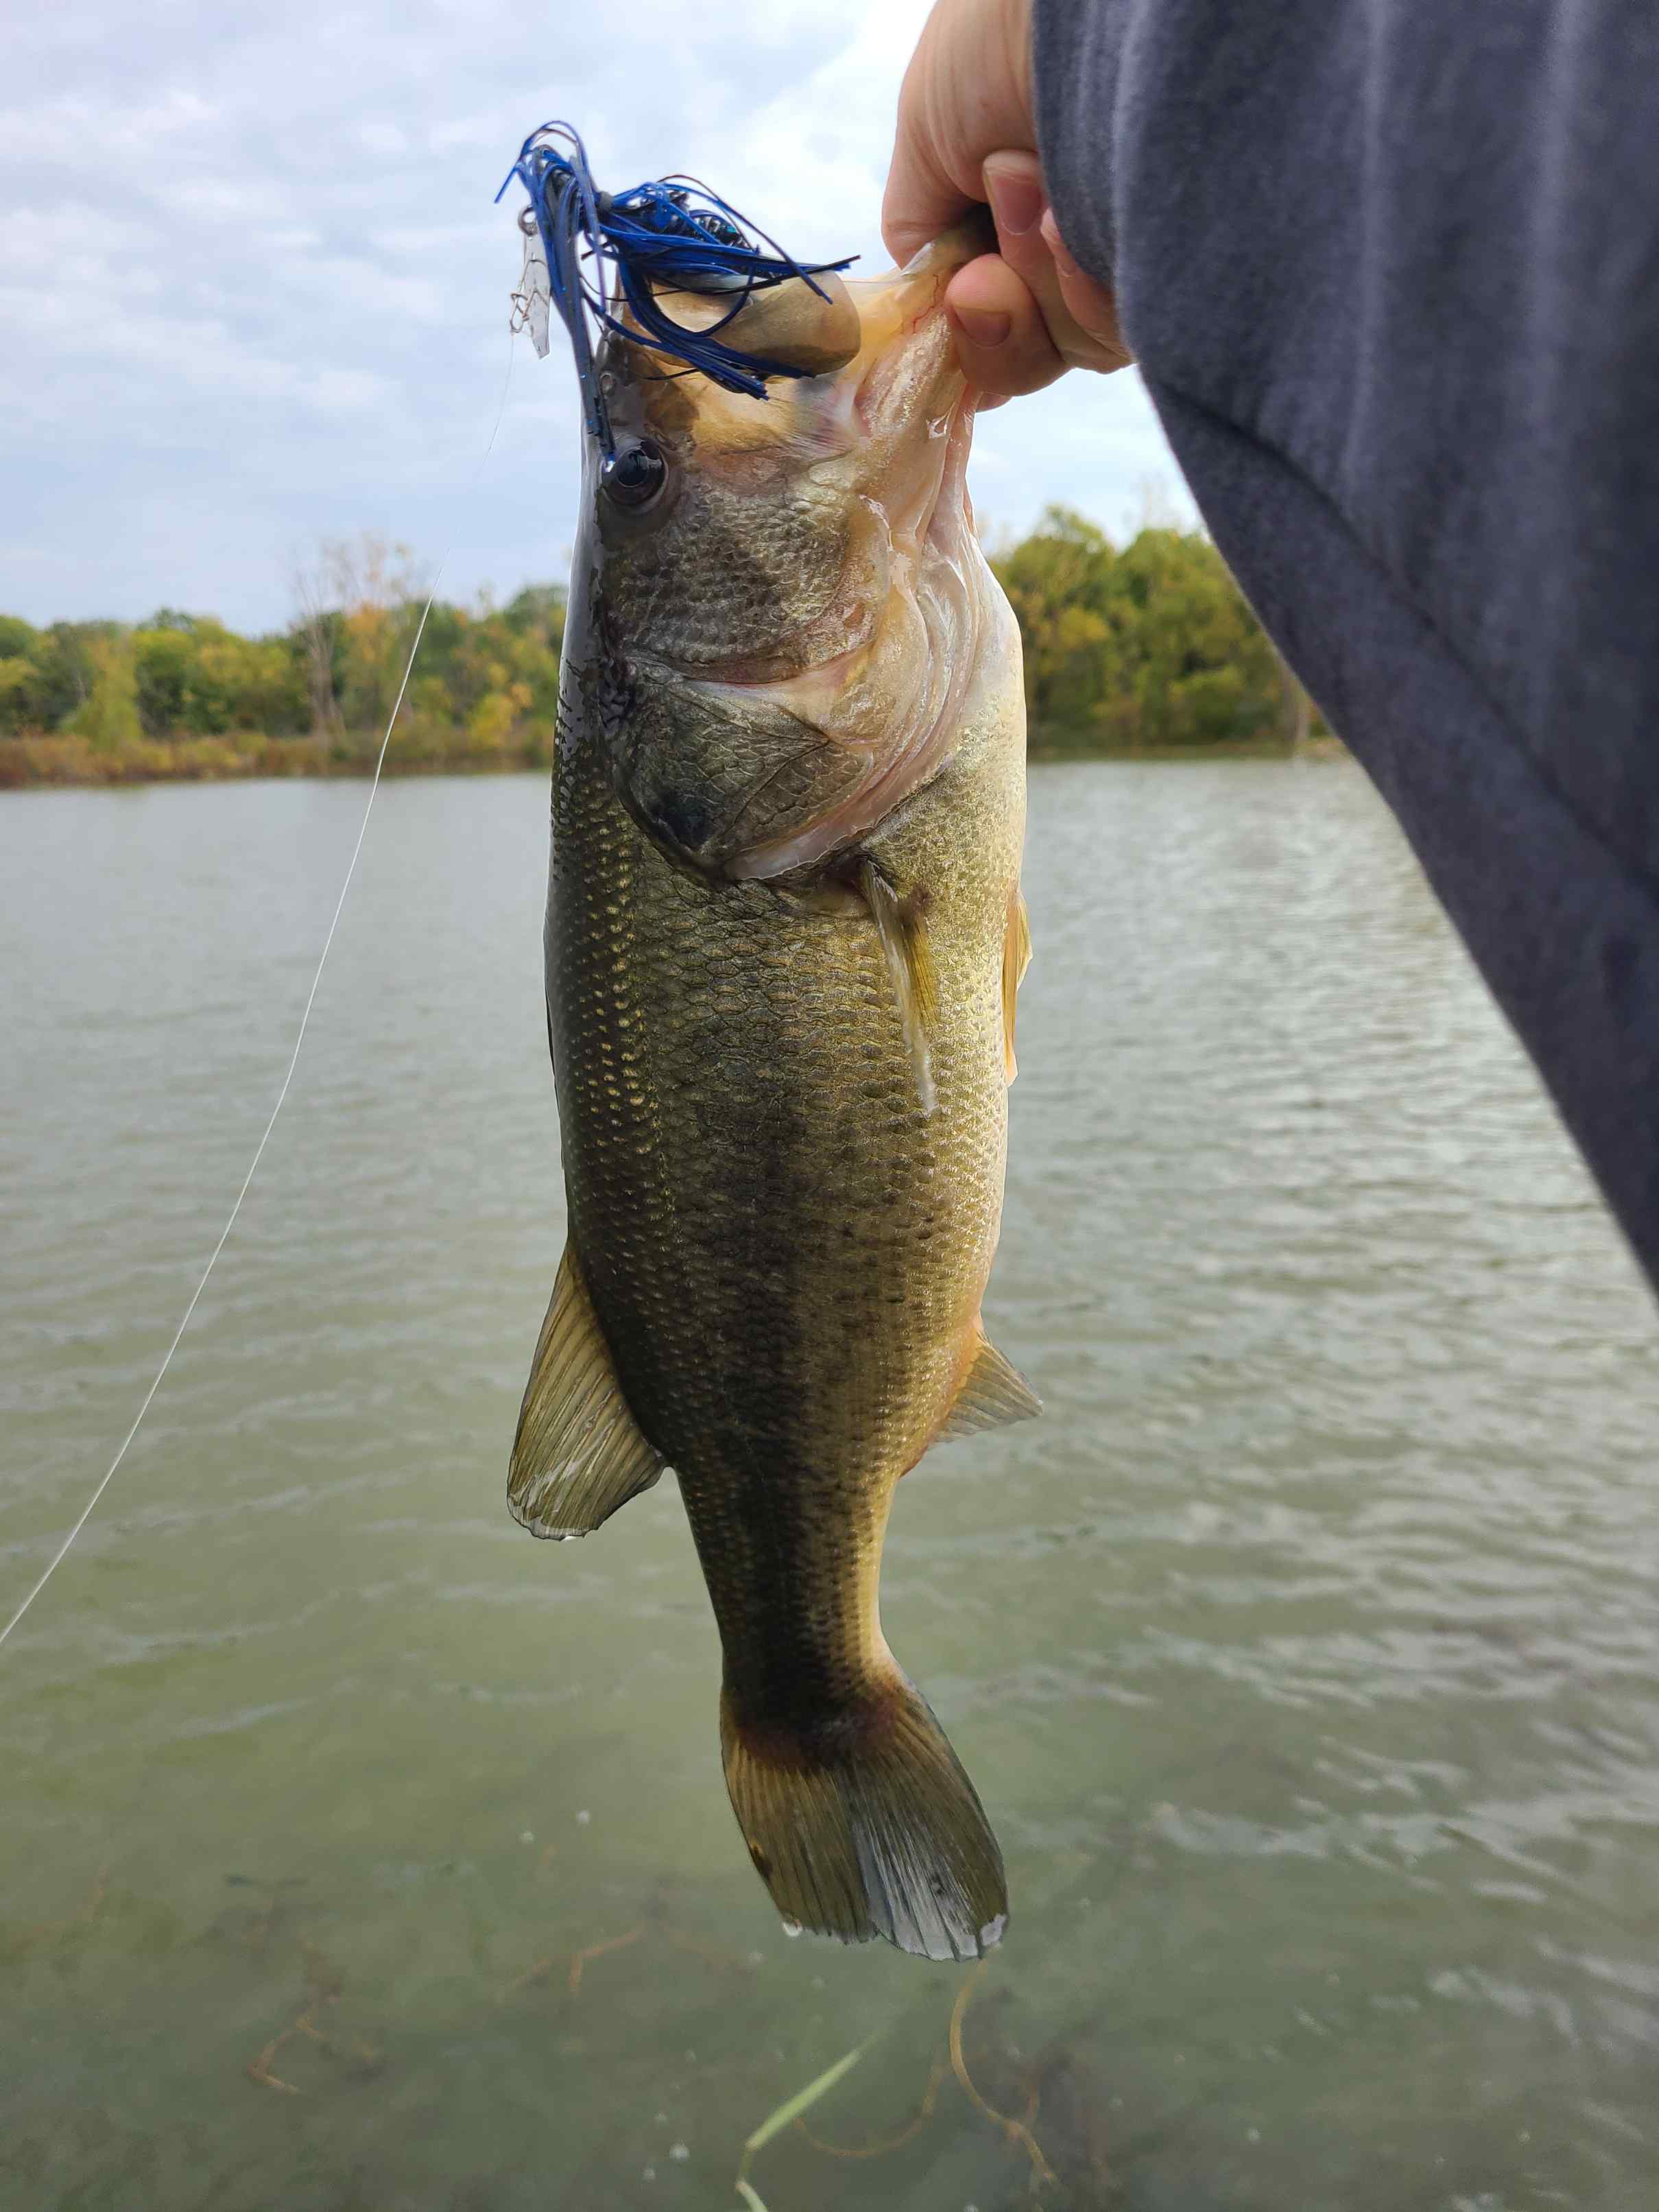 Craziness - Bladed jig the best bass bait? - Page 2 - Fishing